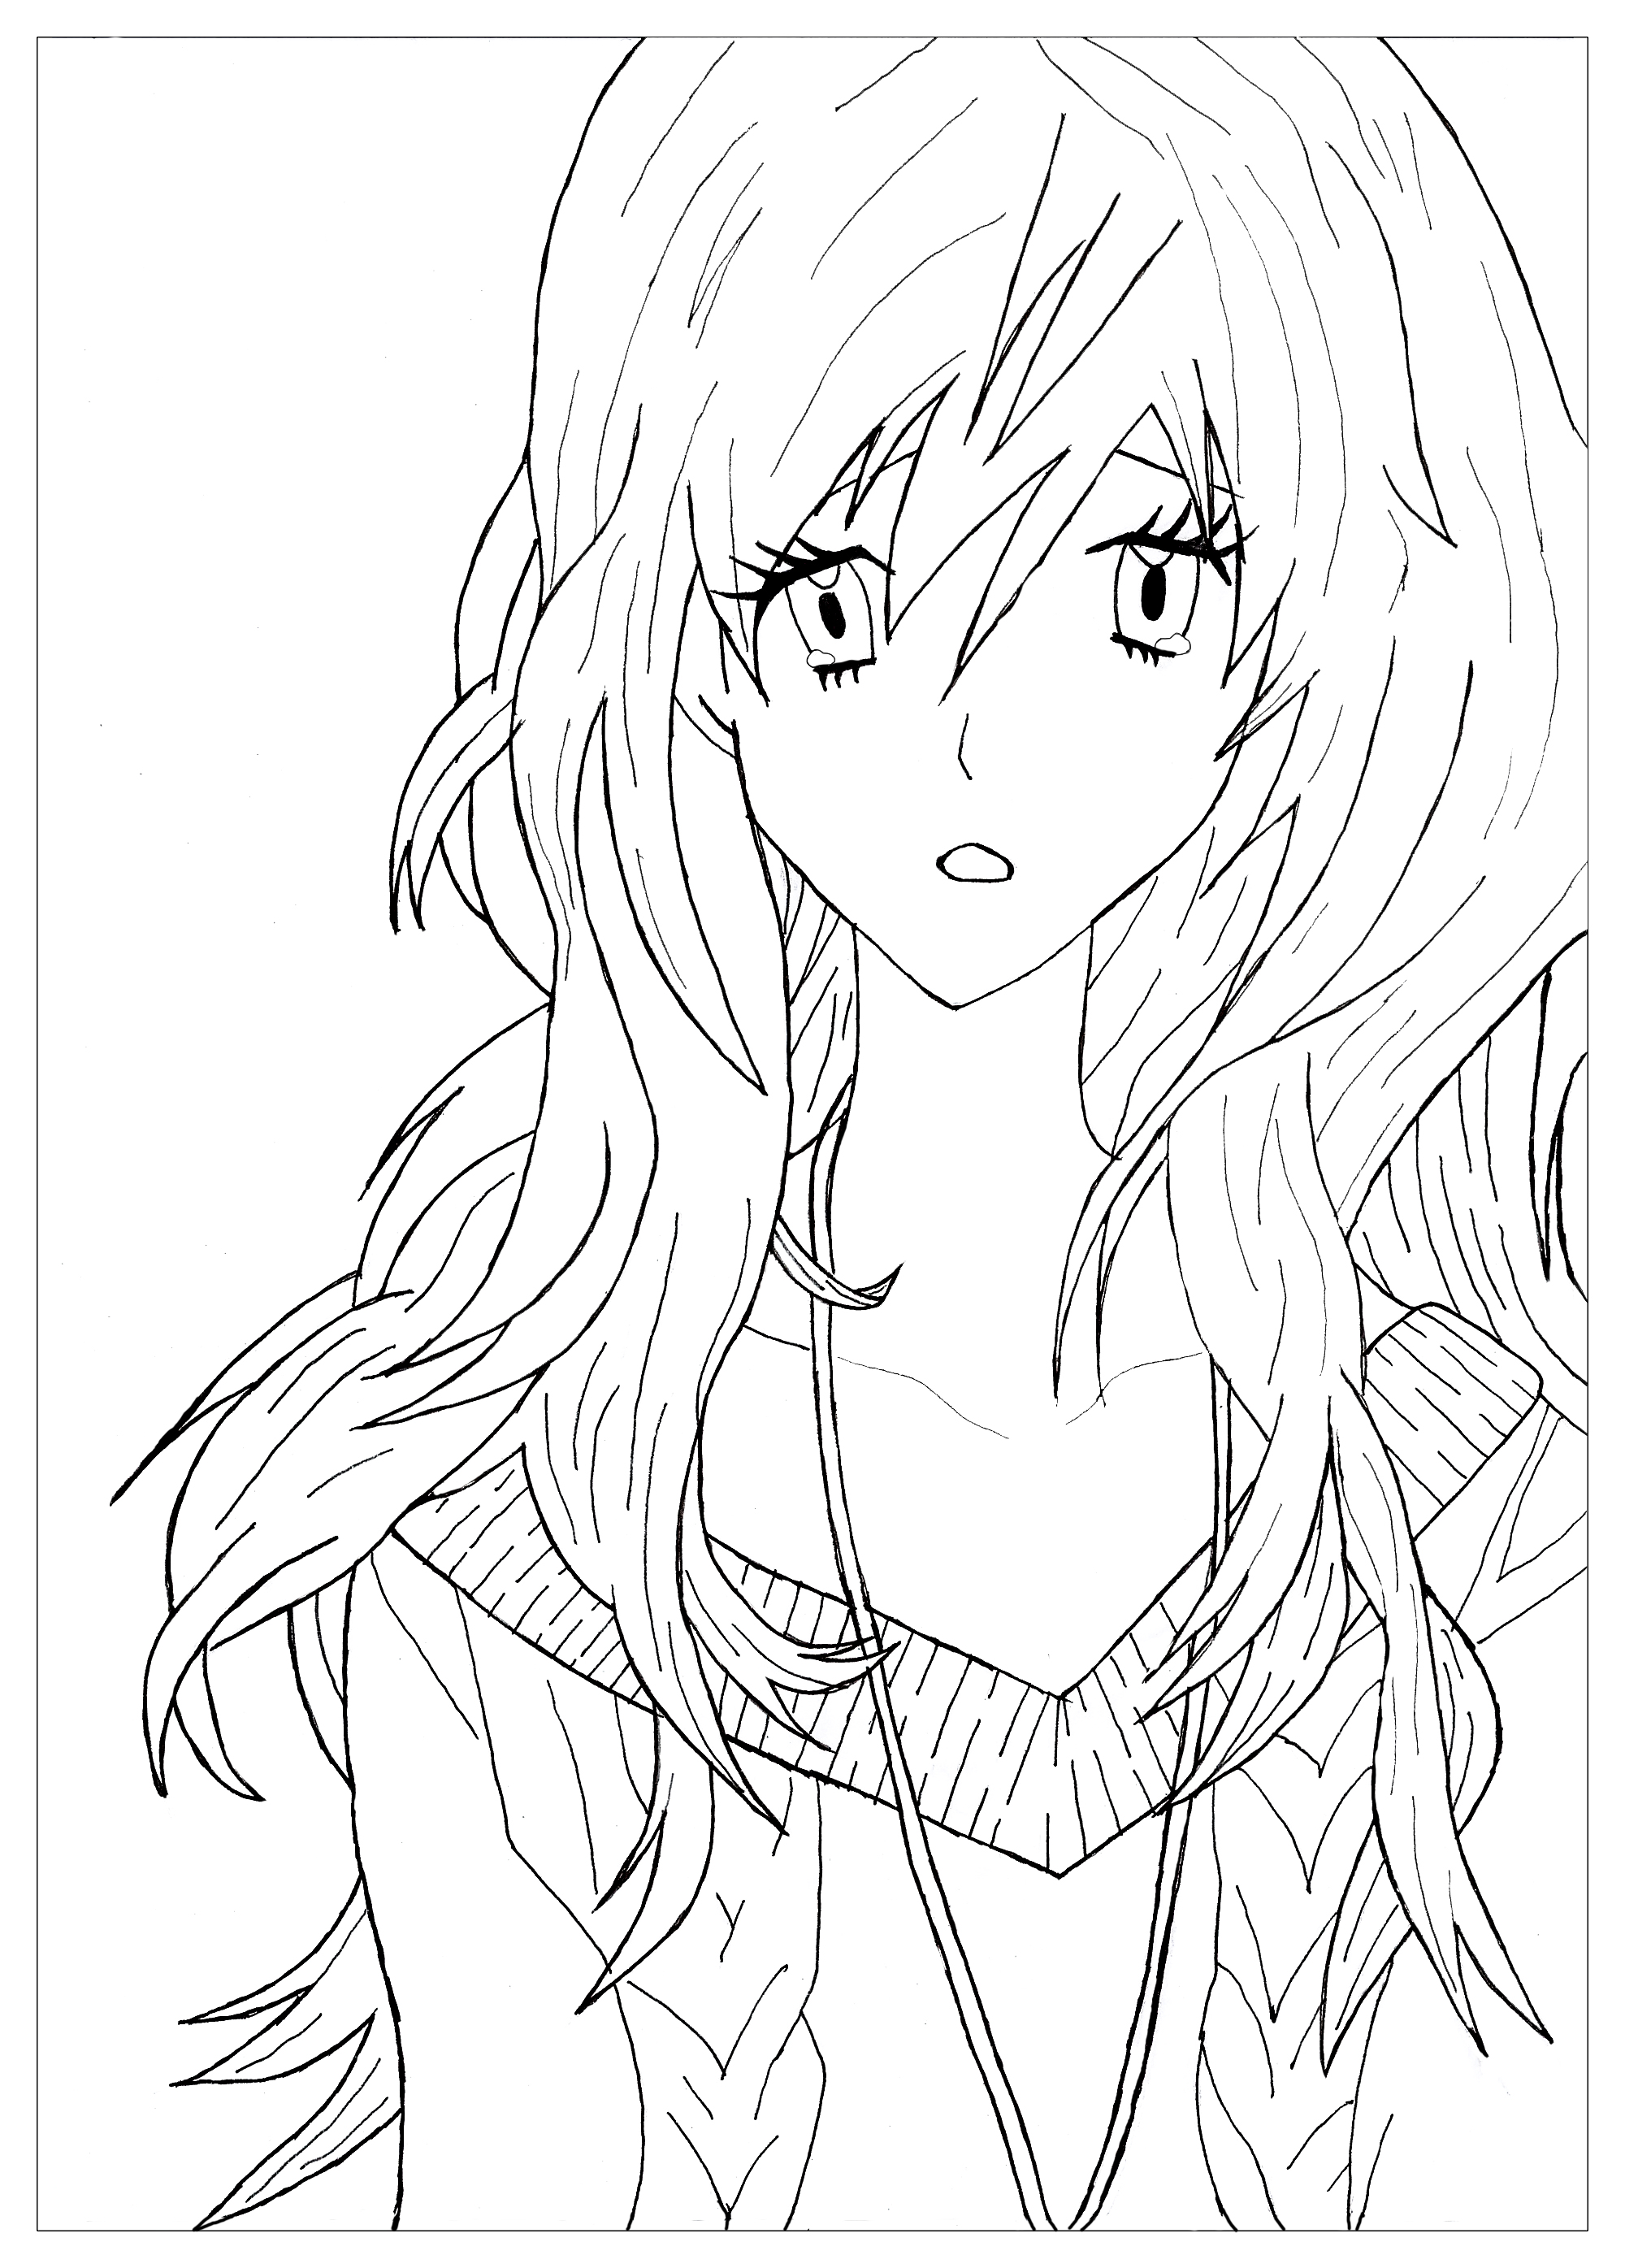 Sad Anime Coloring Pages at GetColorings.com | Free ...